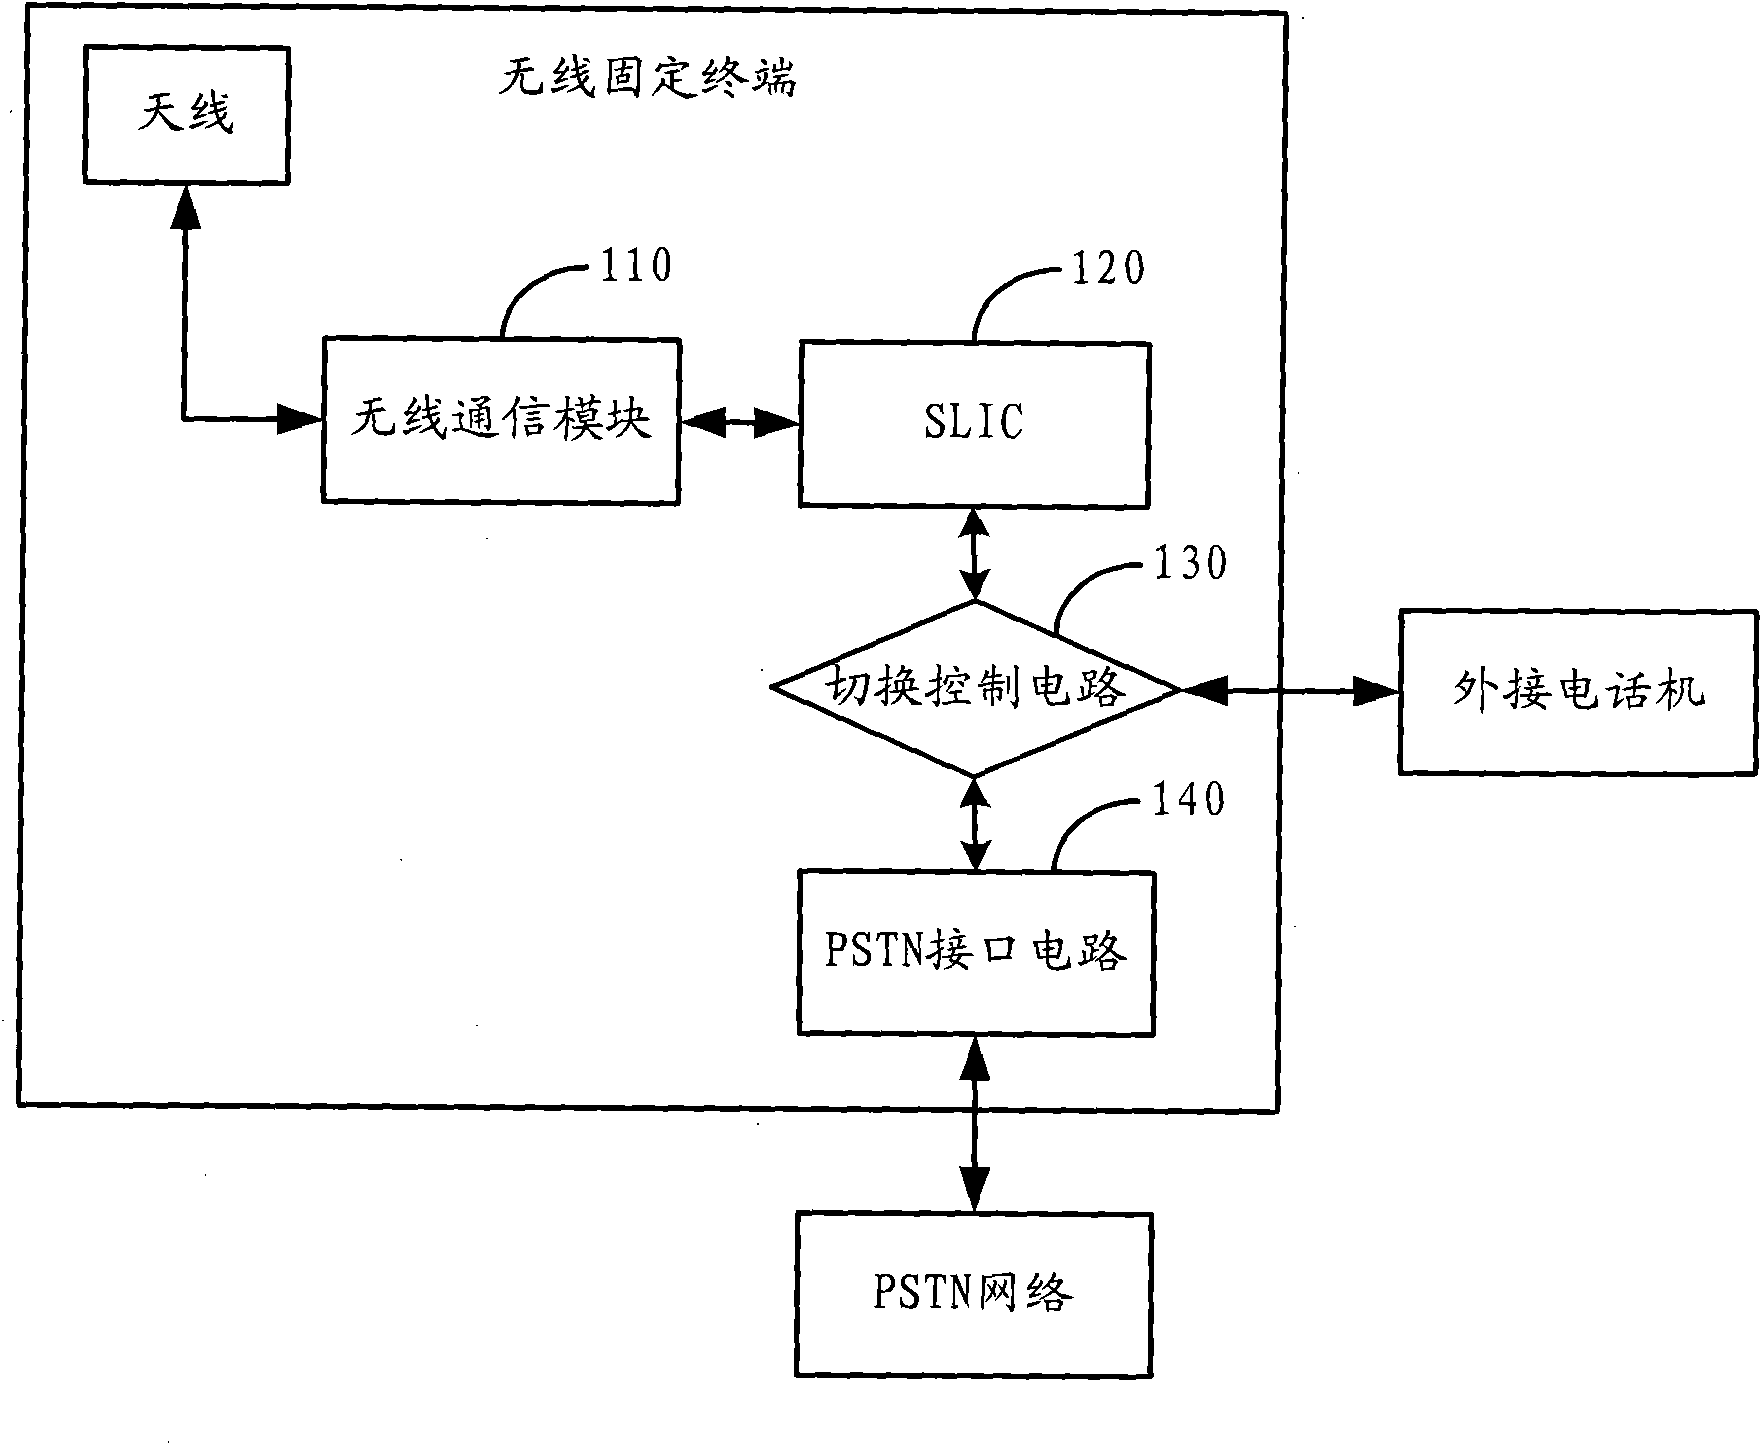 Wireless fixed terminal capable of switching talk lines automatically and switching method